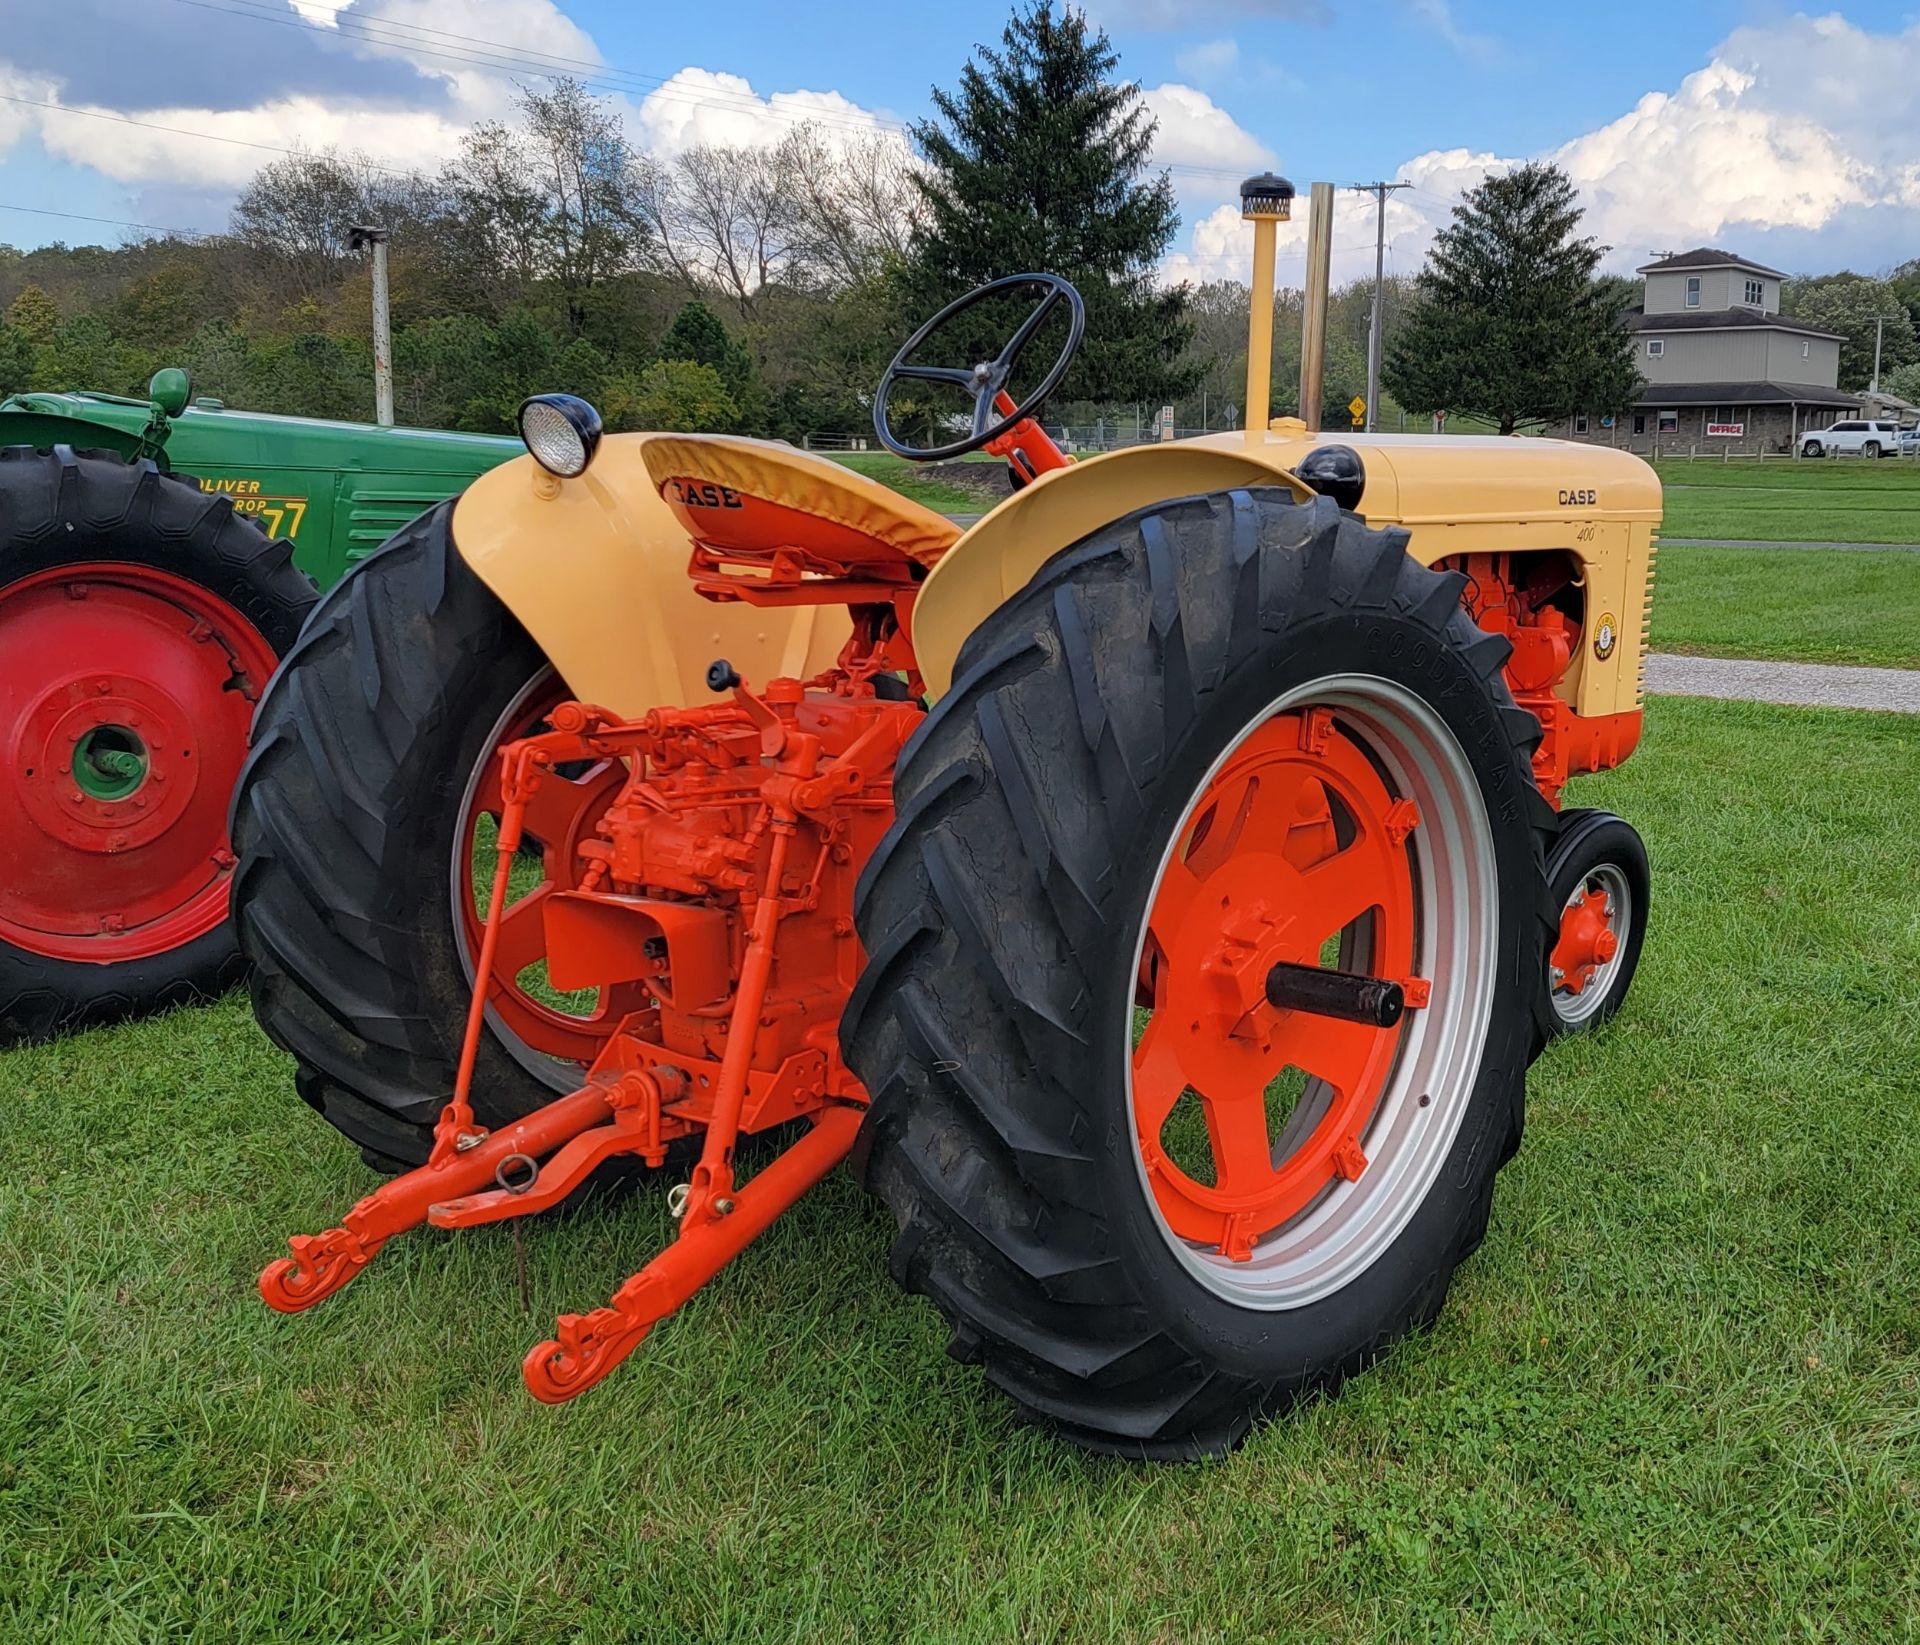 1956 Case 400 Row Crop Tractor, Model 411, s/n 8081224, Gasoline Engine, New in 1956, Restored - Image 19 of 32